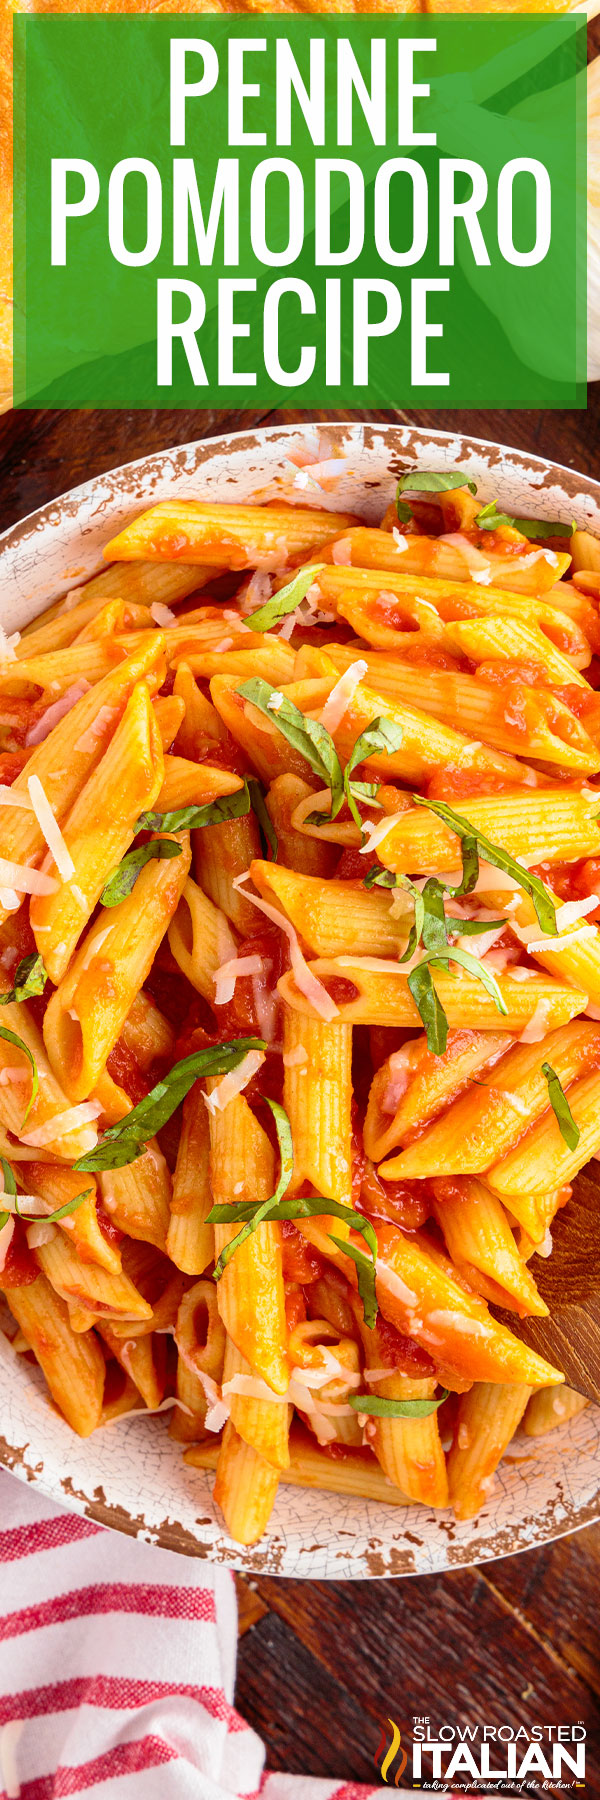 titled image (and shown): penne pomodoro